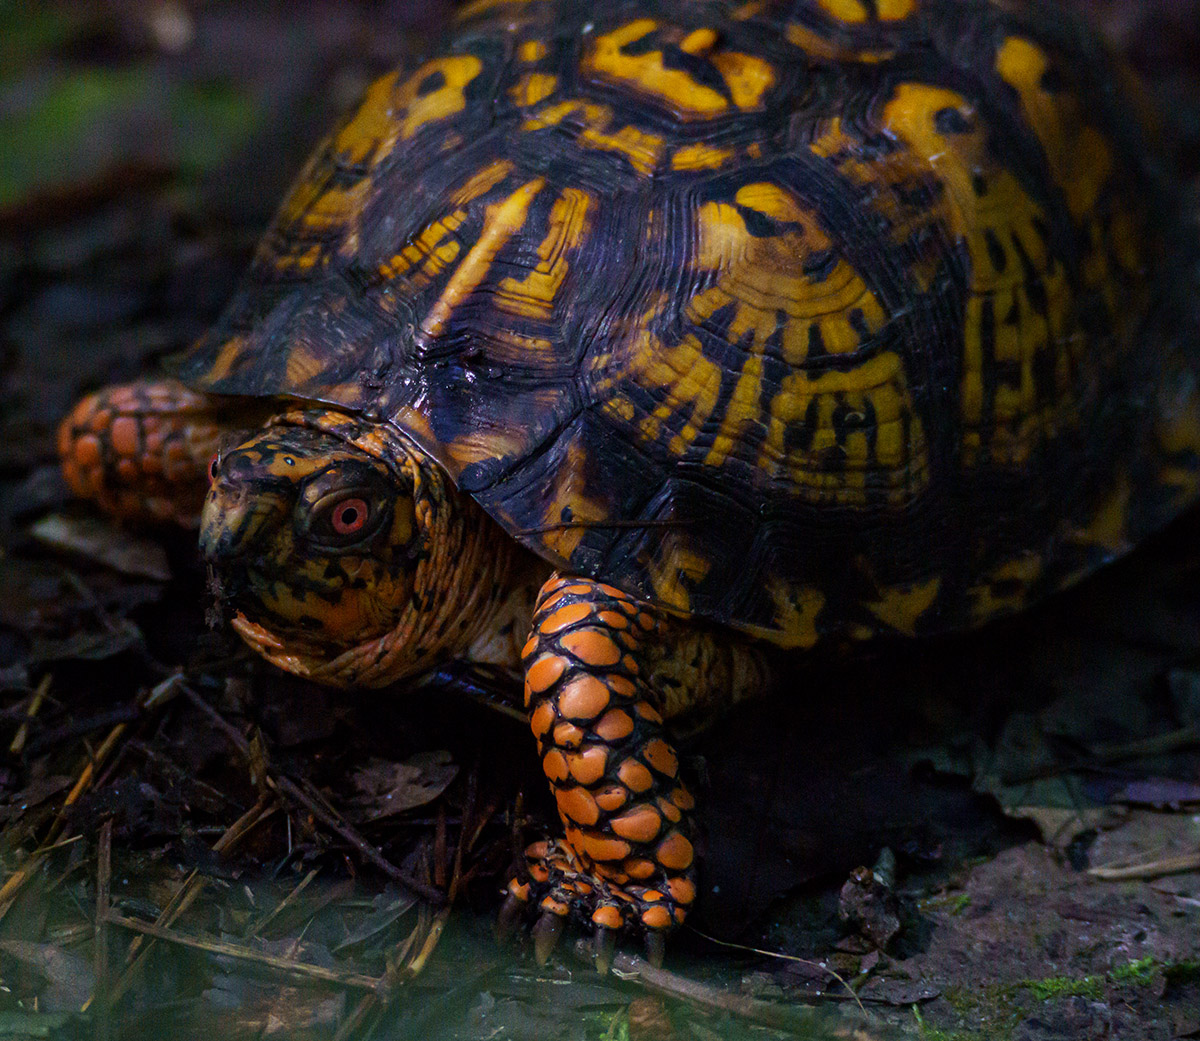 One of the many box turtles at Newport News Park.